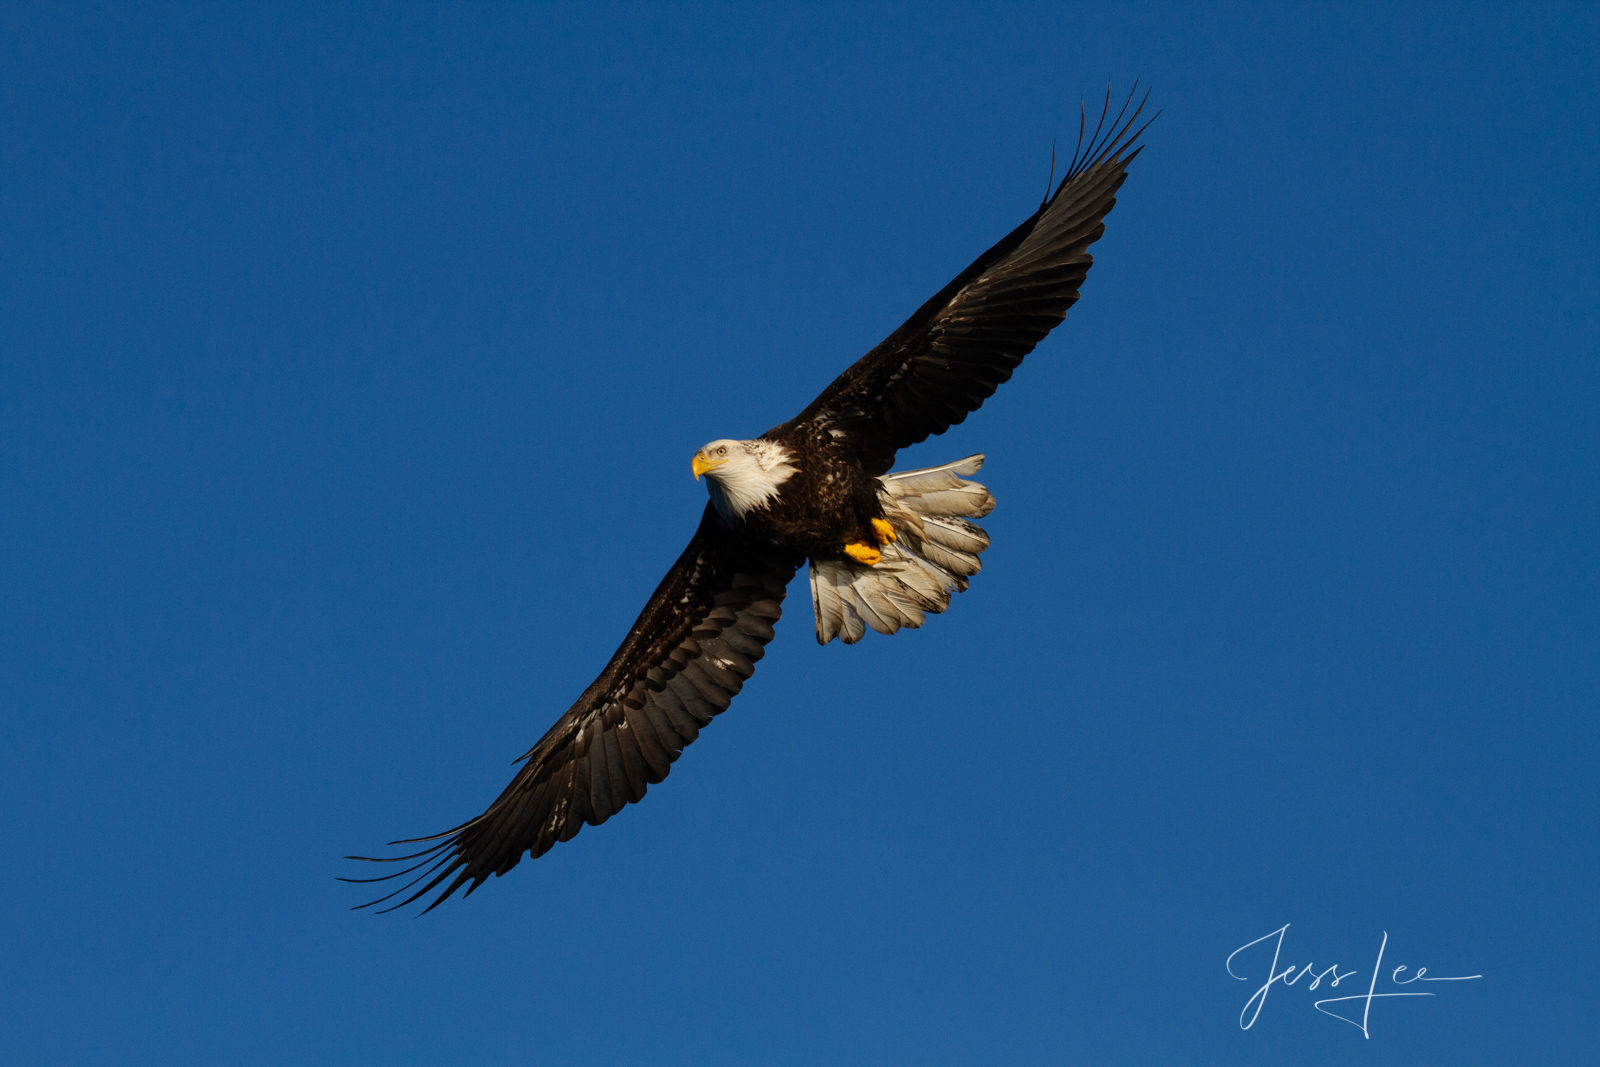 Bring home the power and beauty of the amazing fine art American Bald Eagle photograph On Path by Jess Lee from his Wildlife...